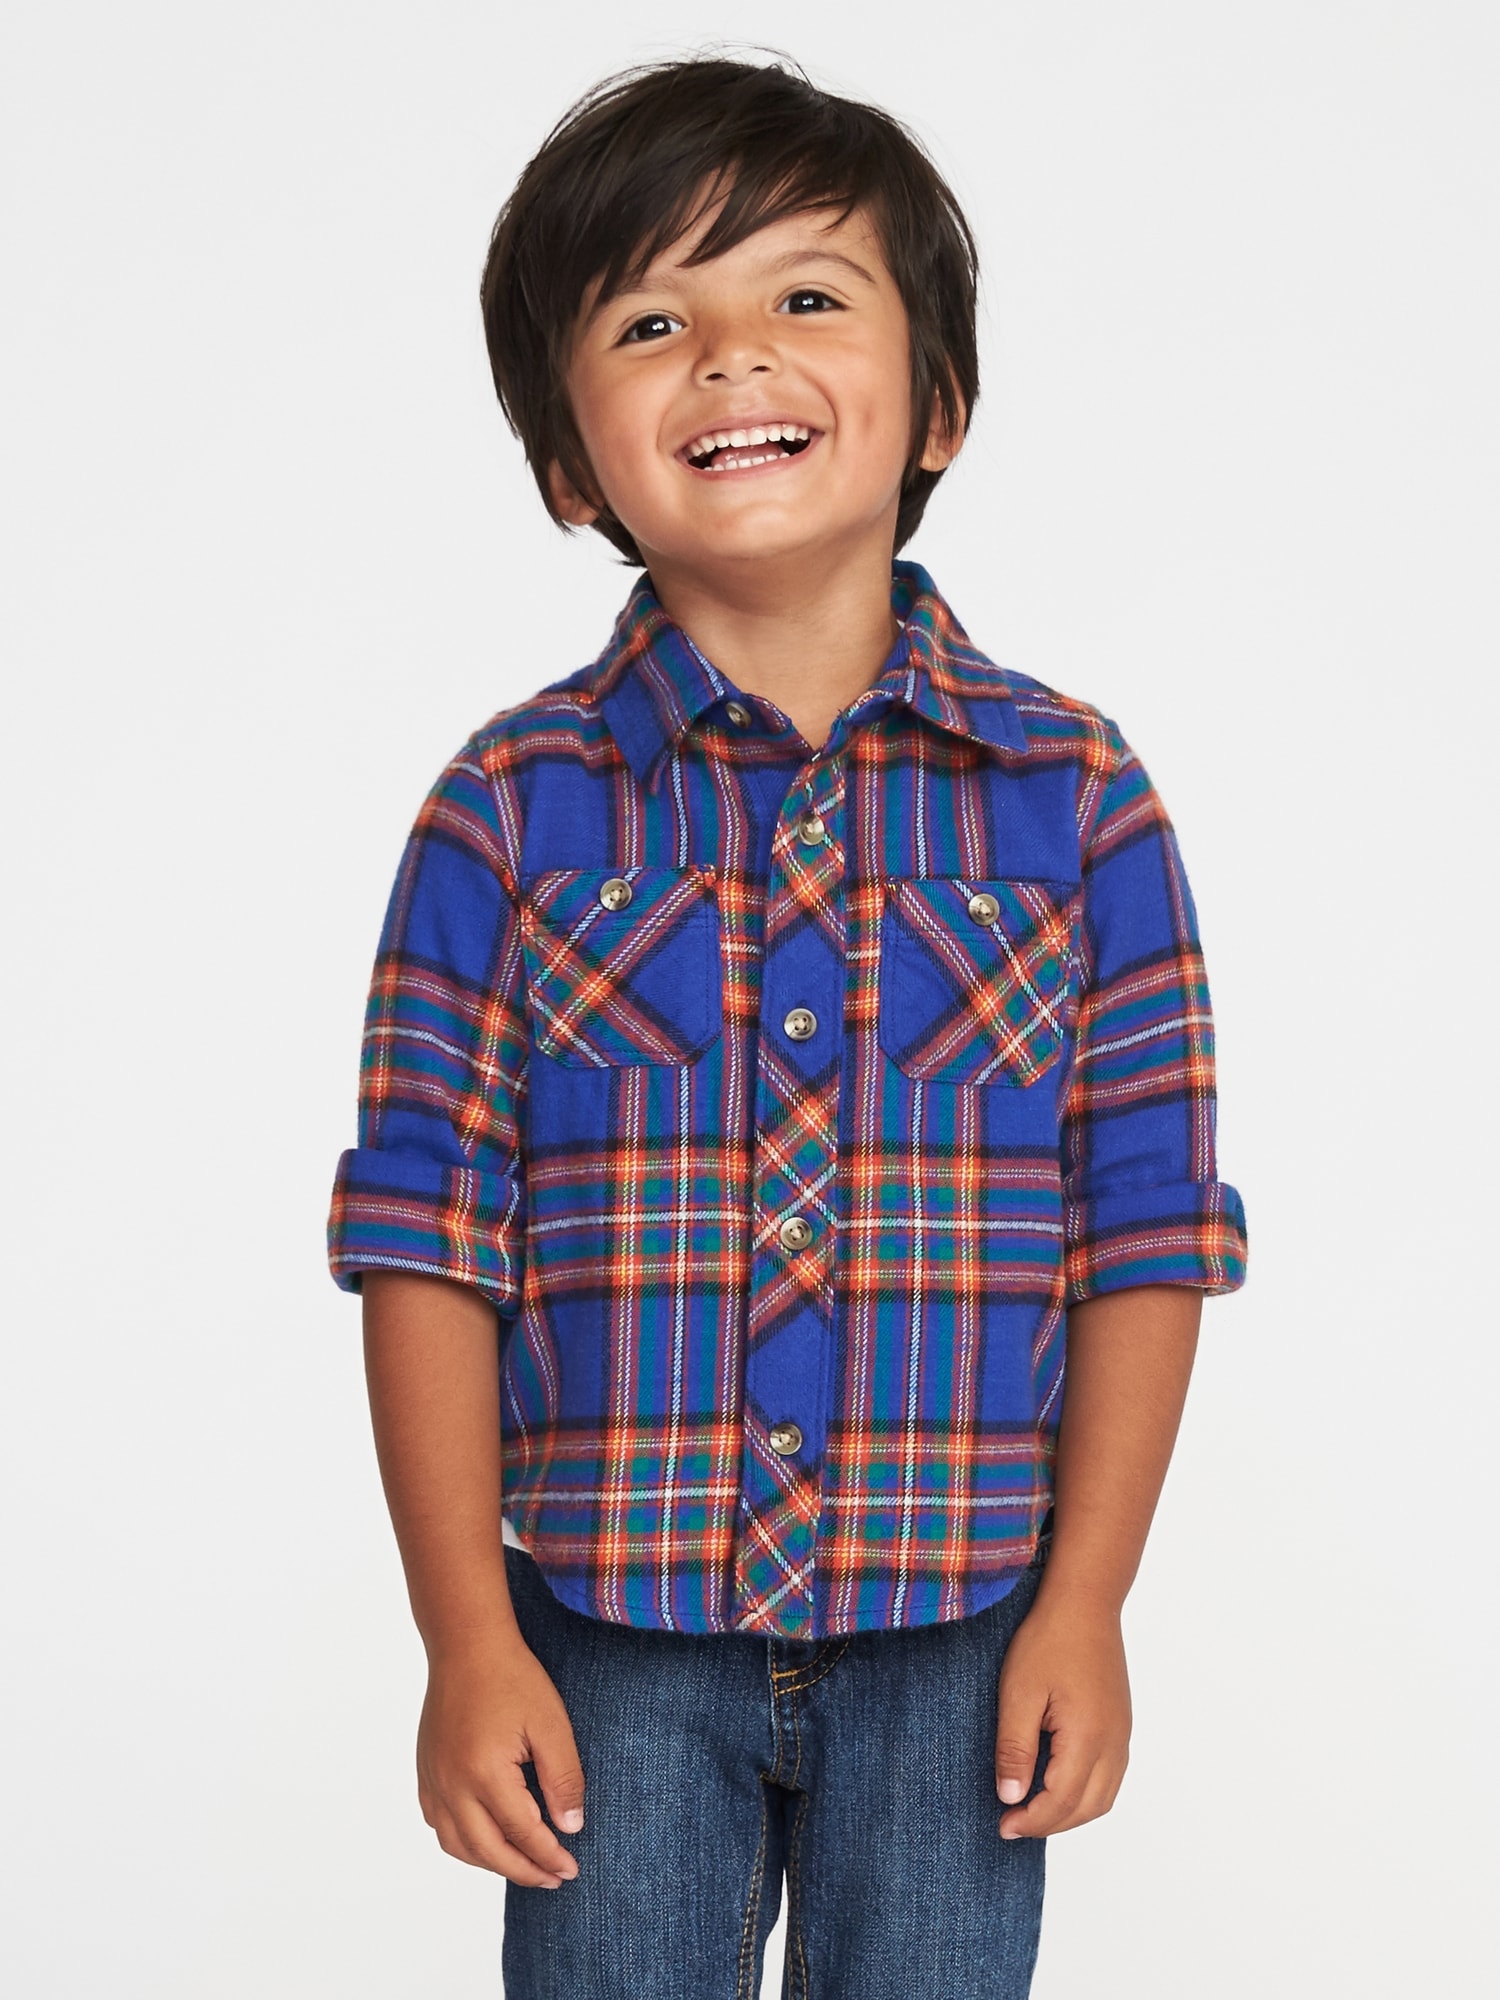 Plaid Flannel Shirt for Toddler Boys | Old Navy